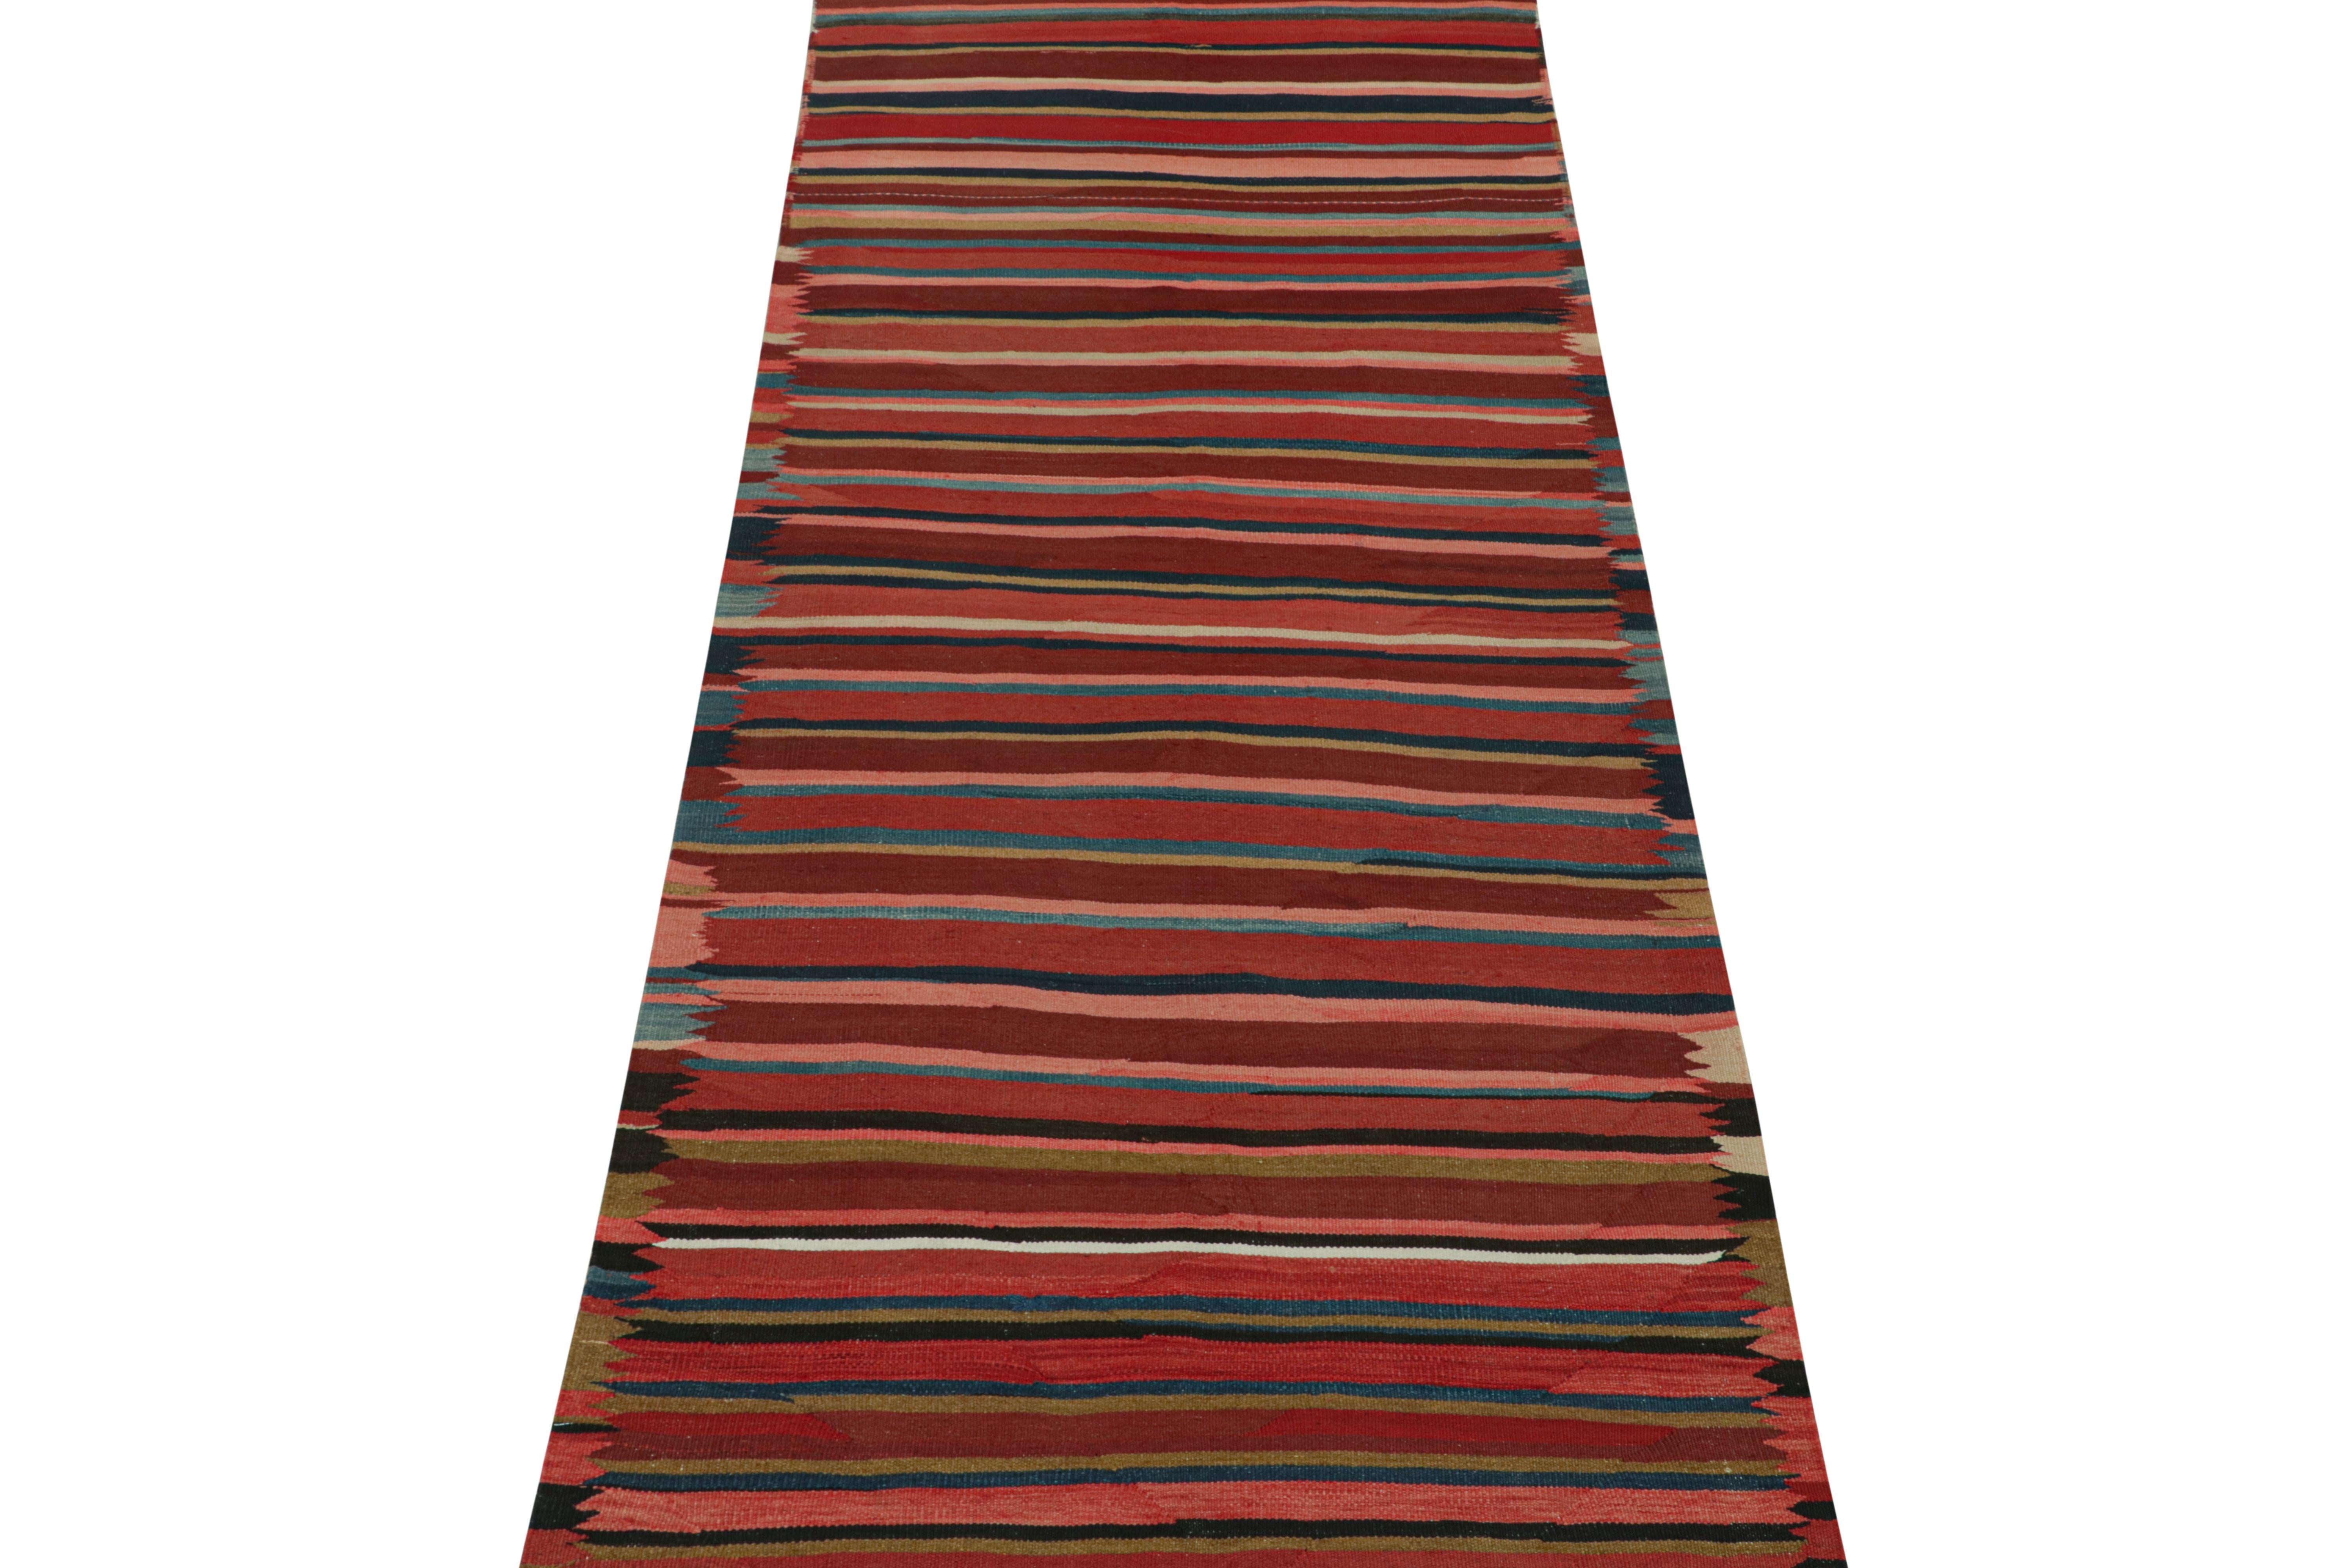 This vintage 5x12 Persian Kilim is a tribal Karadagh rug — named after the mountainous region known for its fabulous works. Handwoven in wool, it originates circa 1950-1960.

Further on the Design:

The bold design prefers striped patterns in